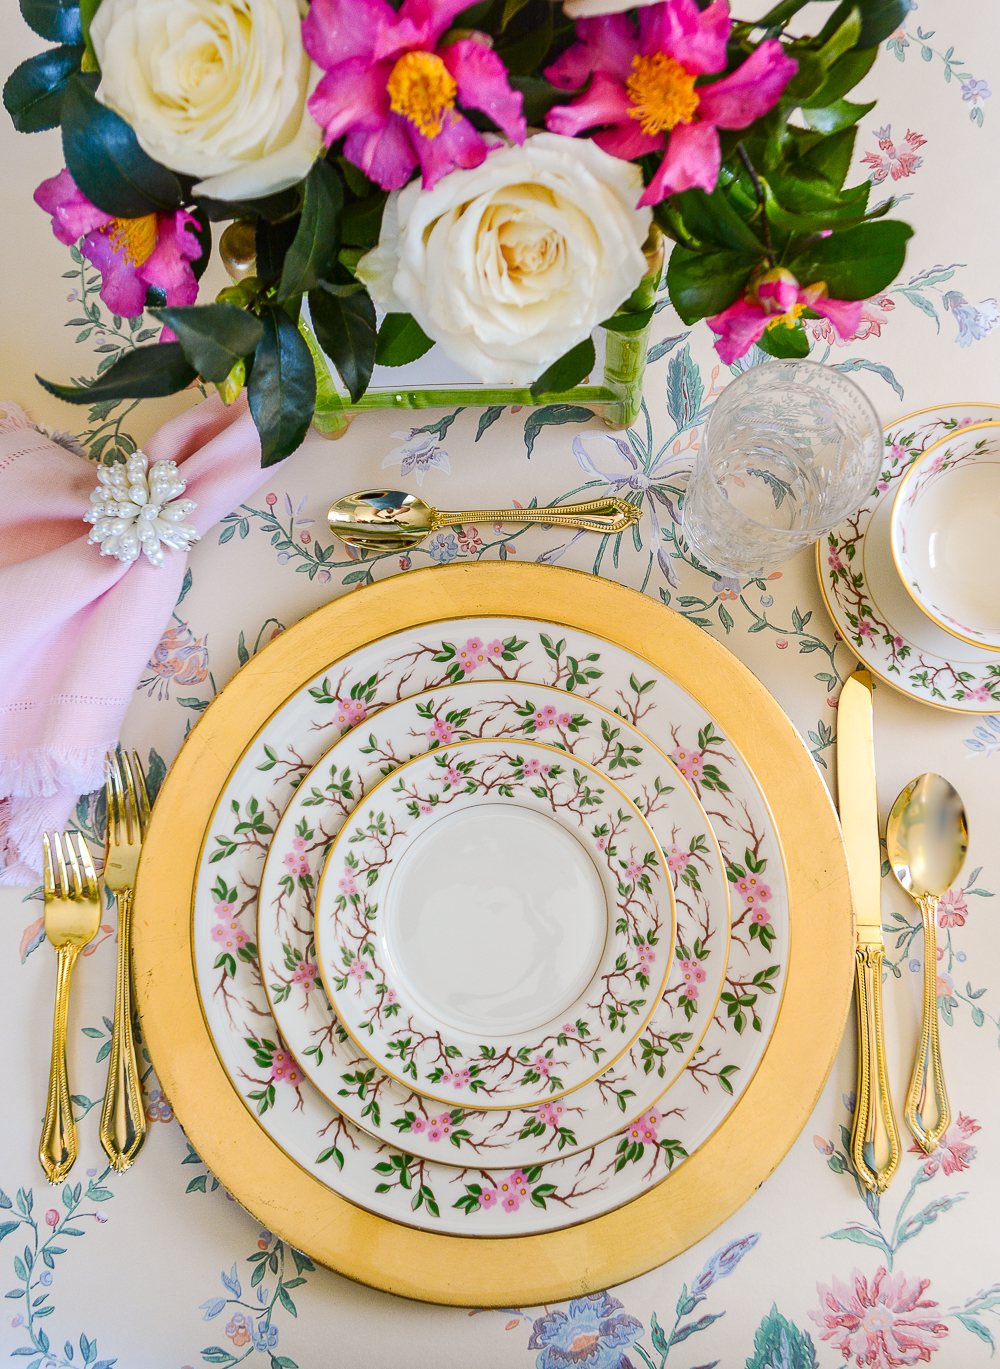 Pink camellias and white roses perfectly set off this Franciscan woodside china for a celebratory dinner.